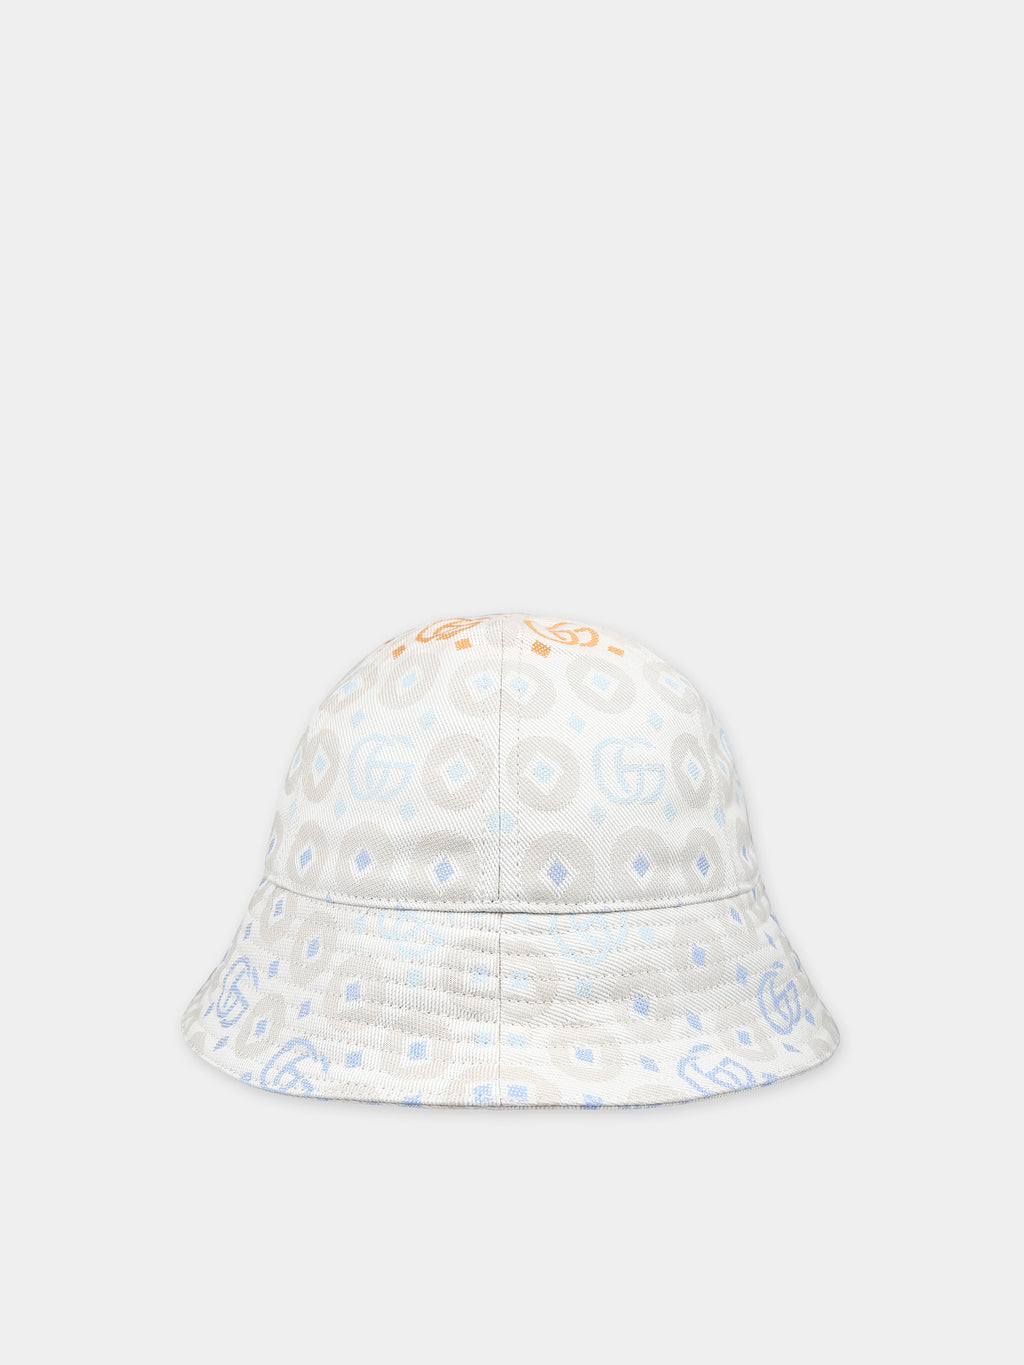 Ivory cloche for kids with double G